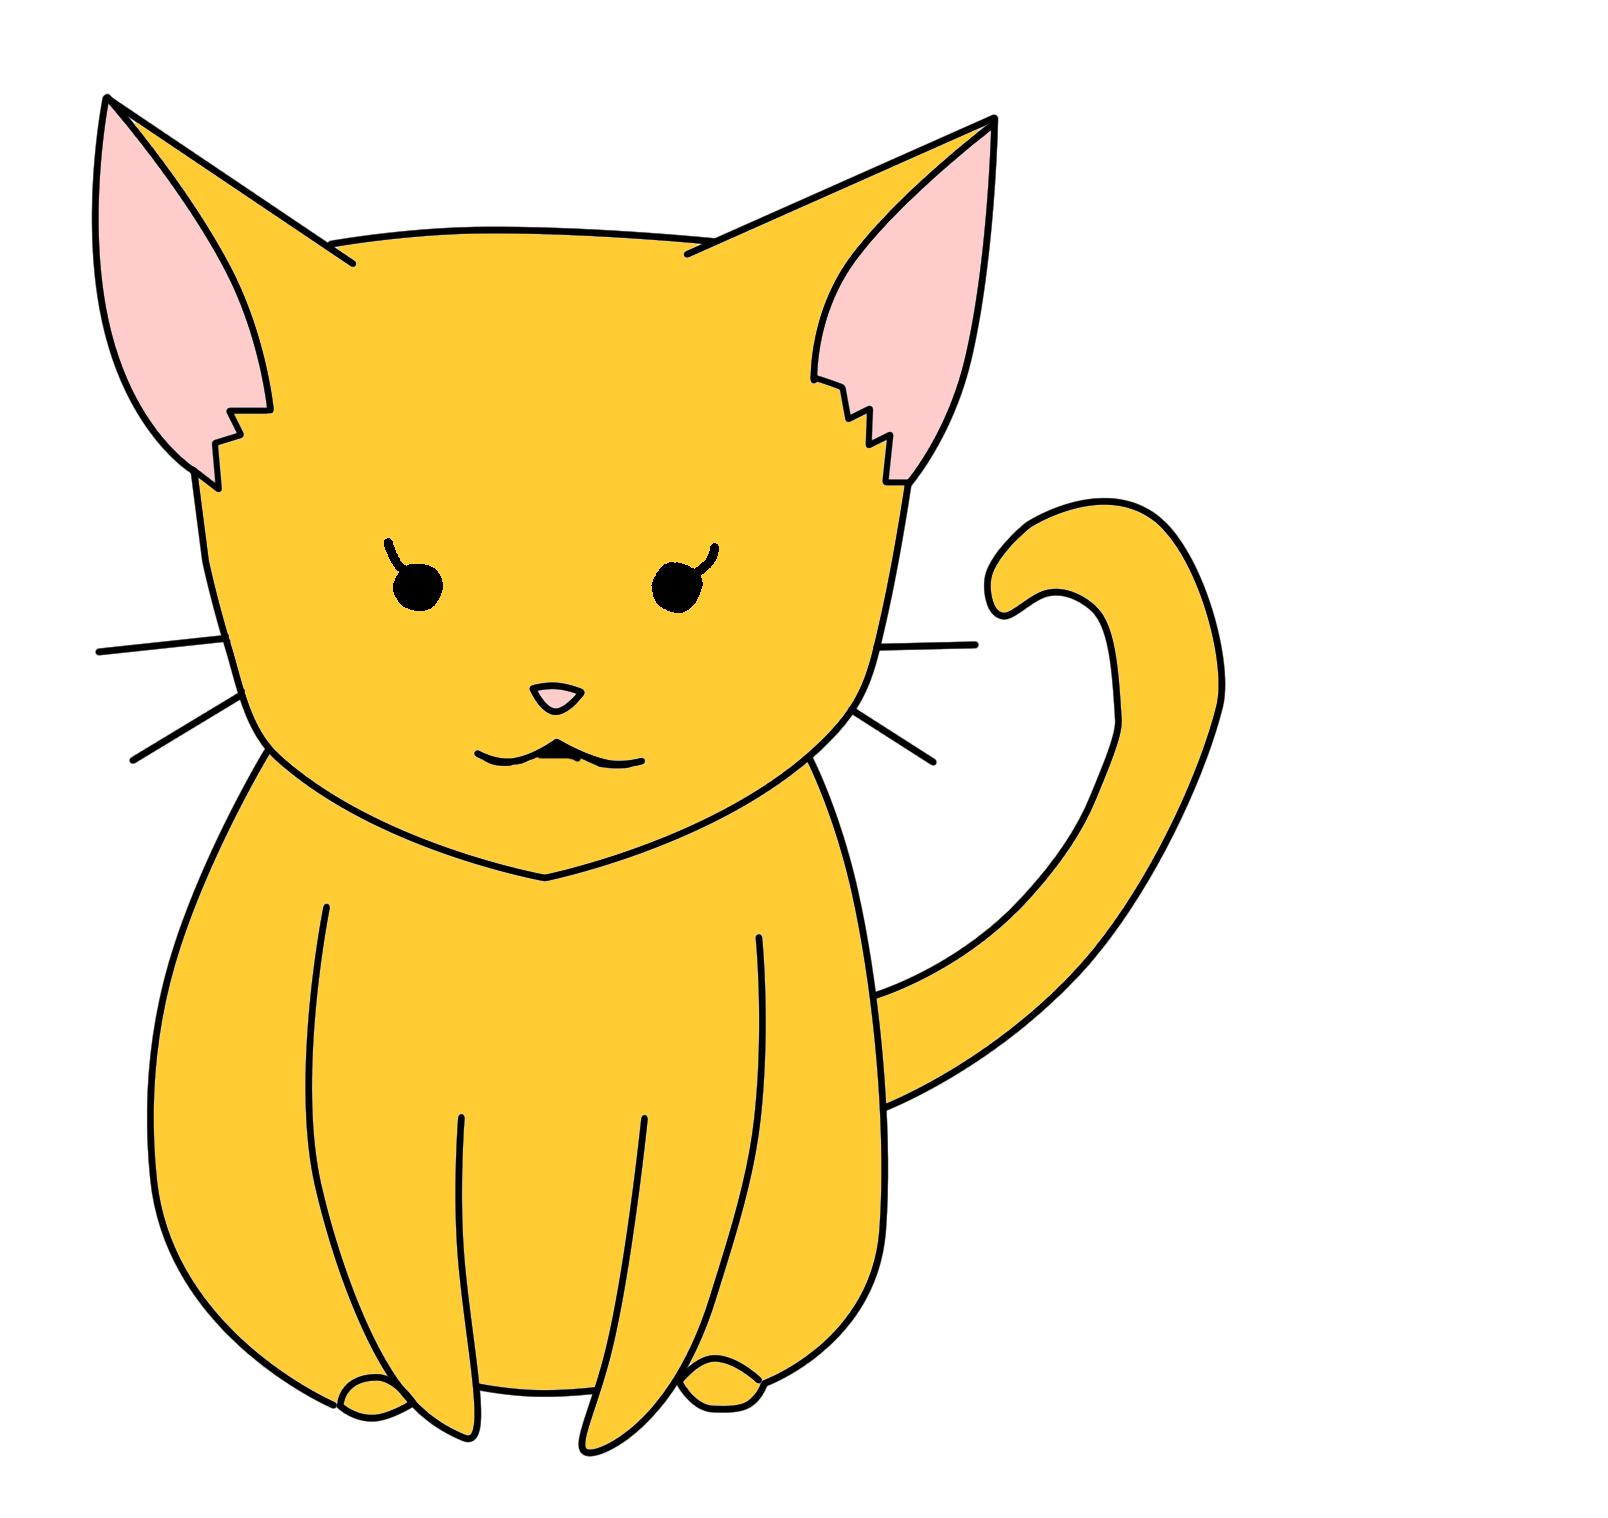 cat animation by budgie-lover on Clipart library